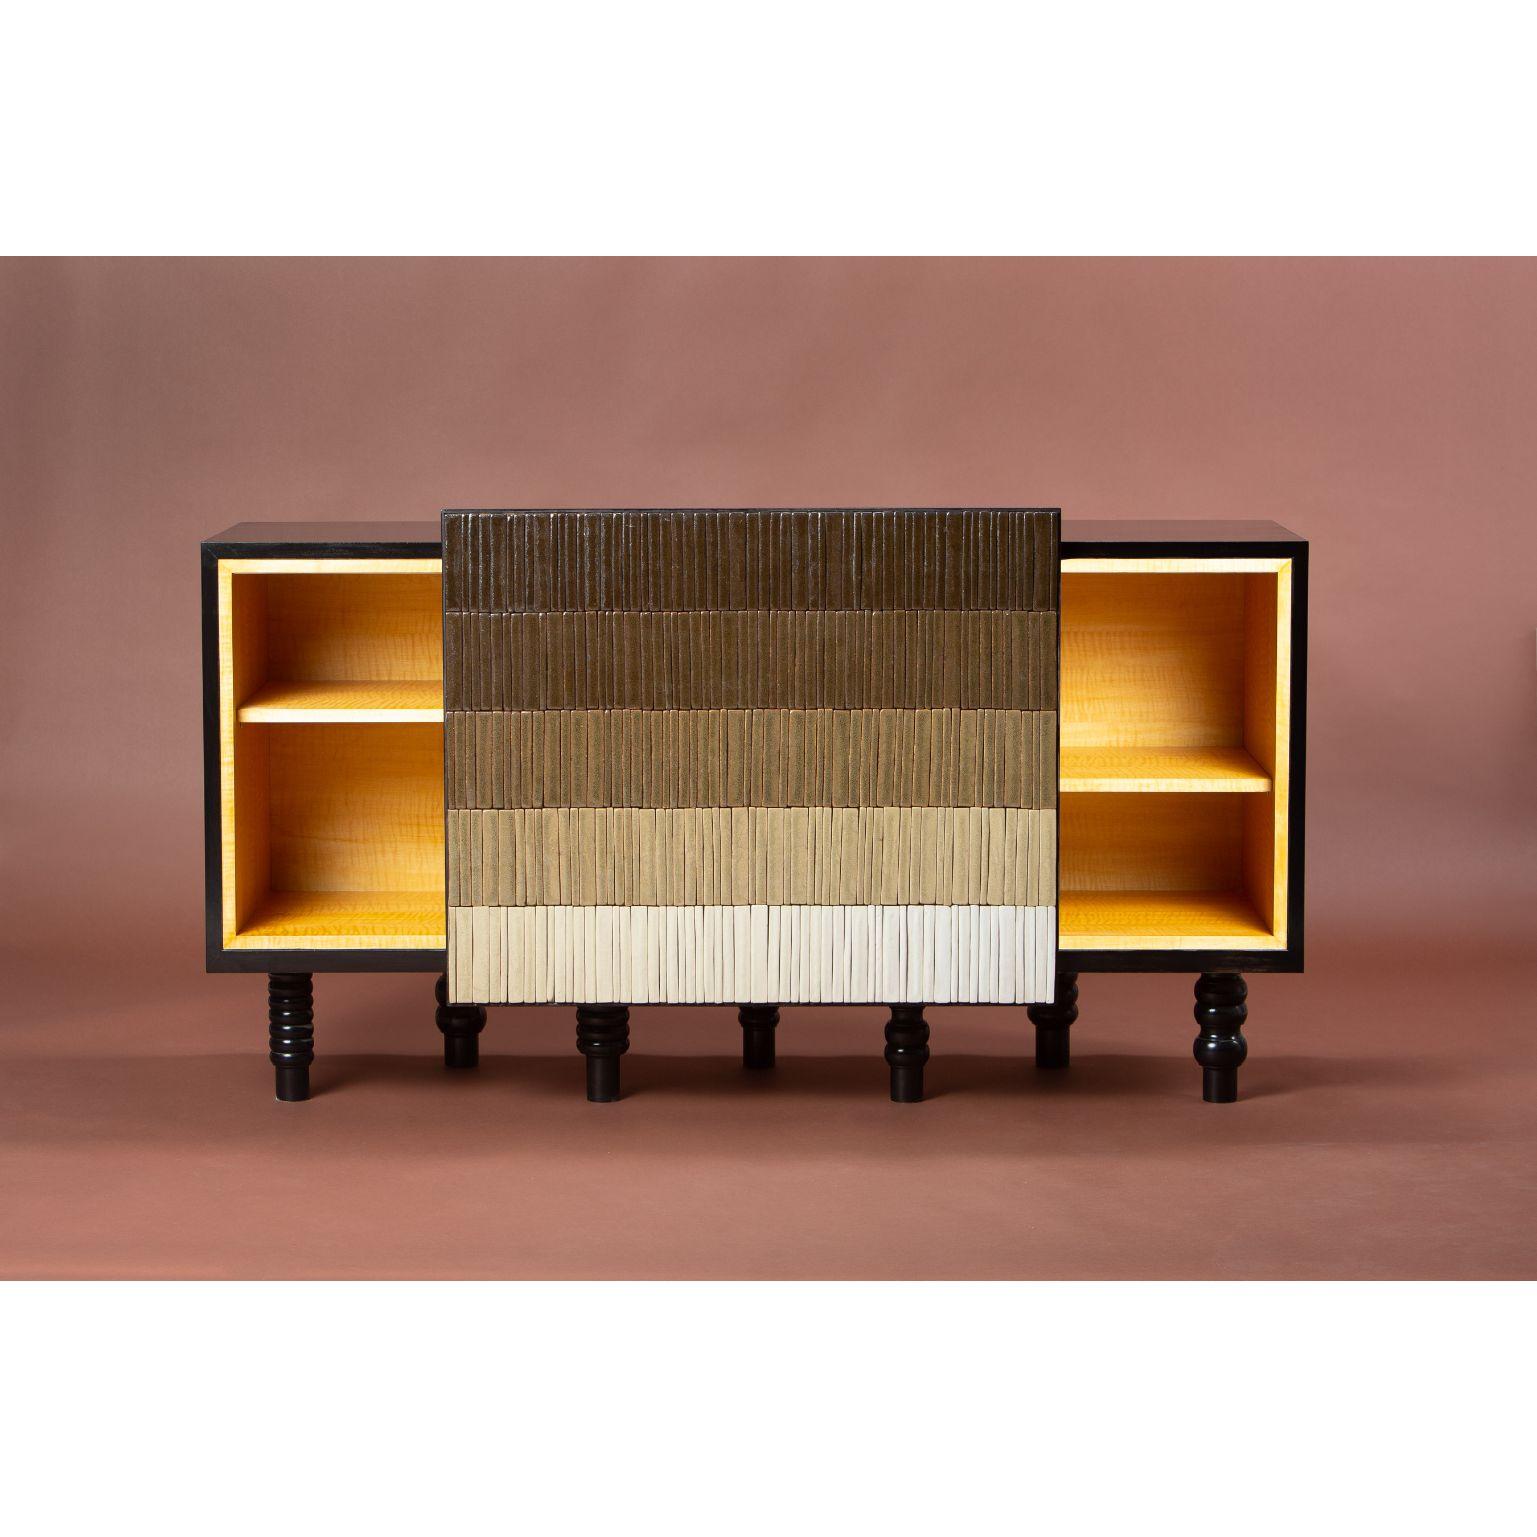 Gradient cabinet - Brown by Milan Pekar, Jakub Vávra
Dimensions: 180 x 45 x 70 cm
Materials: Glaze, ceramic

Hand-crafted in the Czech Republic

Gradient is an original furniture collection combining exotic wood and ceramic mosaic, developed